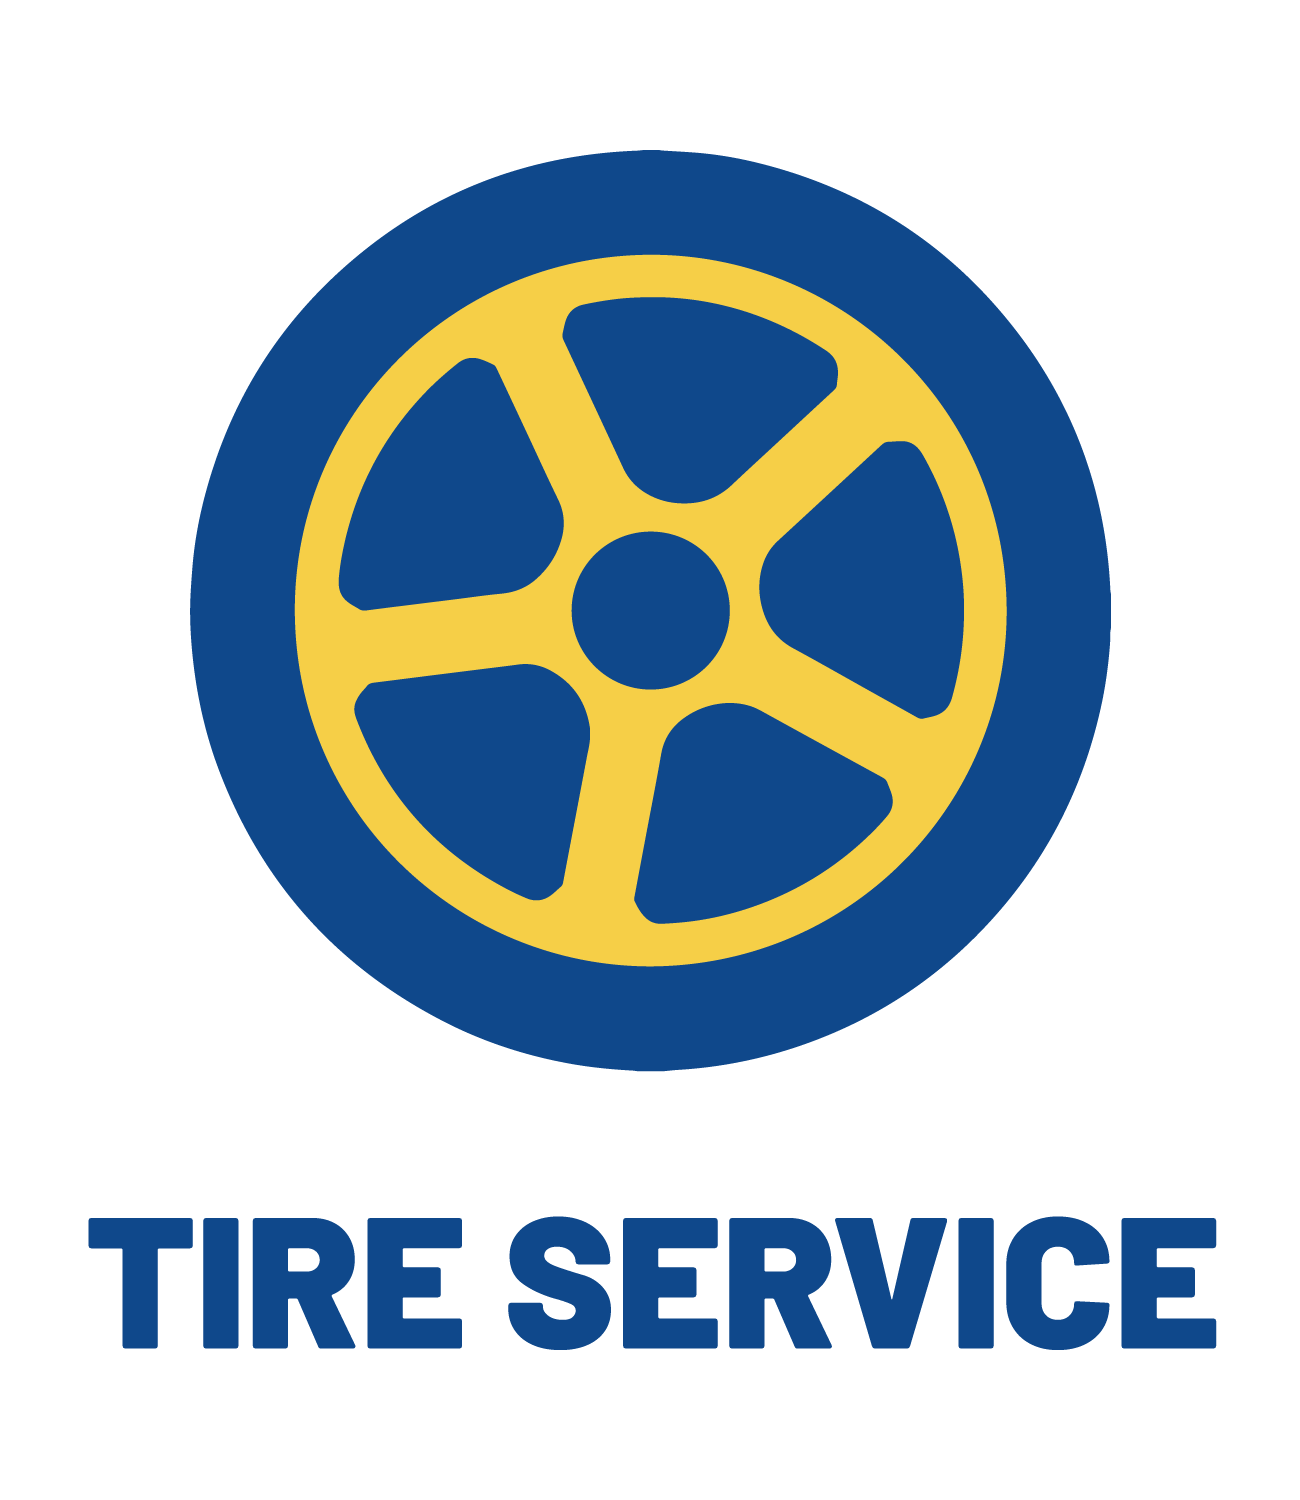 Learn more about tire services